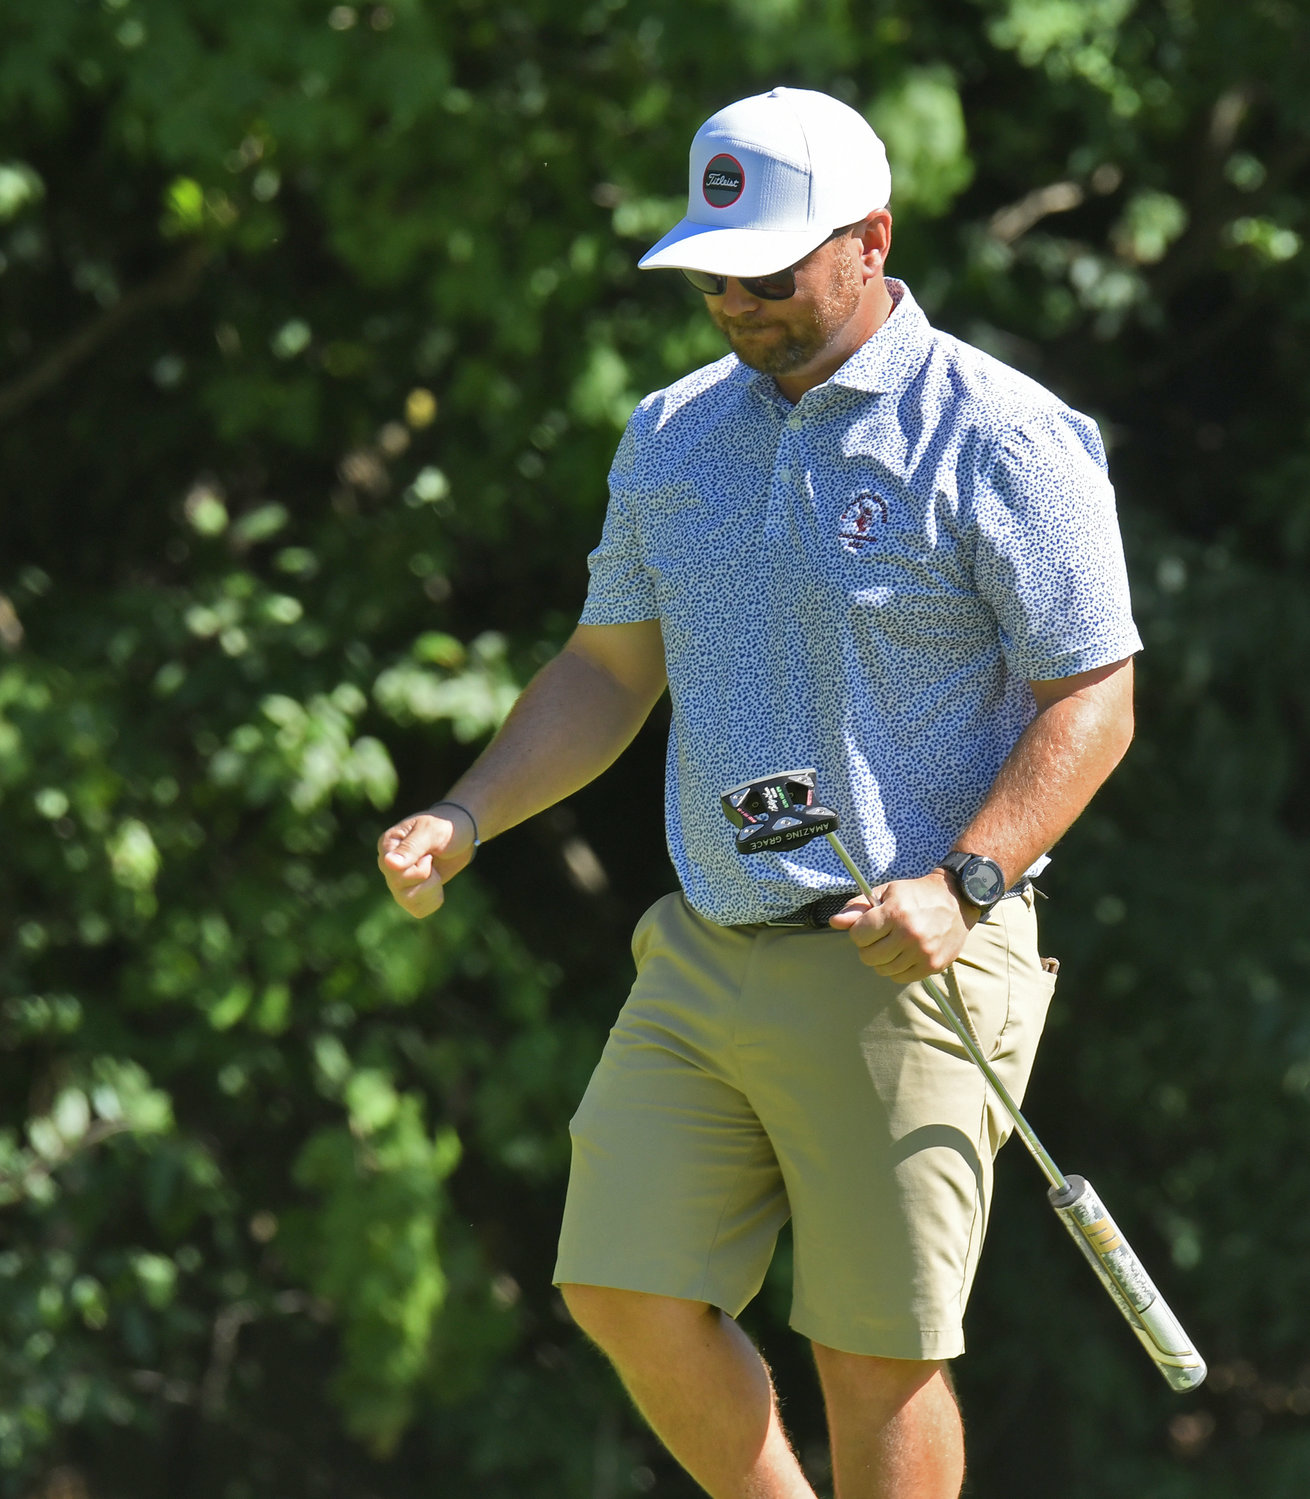 Ryan Borruso reacts with a little fist pump after making a birdie putt on the par 5 15th hole on Sunday afternoon at McConnellsville Country Club during the final round of the Rome City Men’s Amateur Golf Championship. Borruso won his third straight city title and fifth overall.